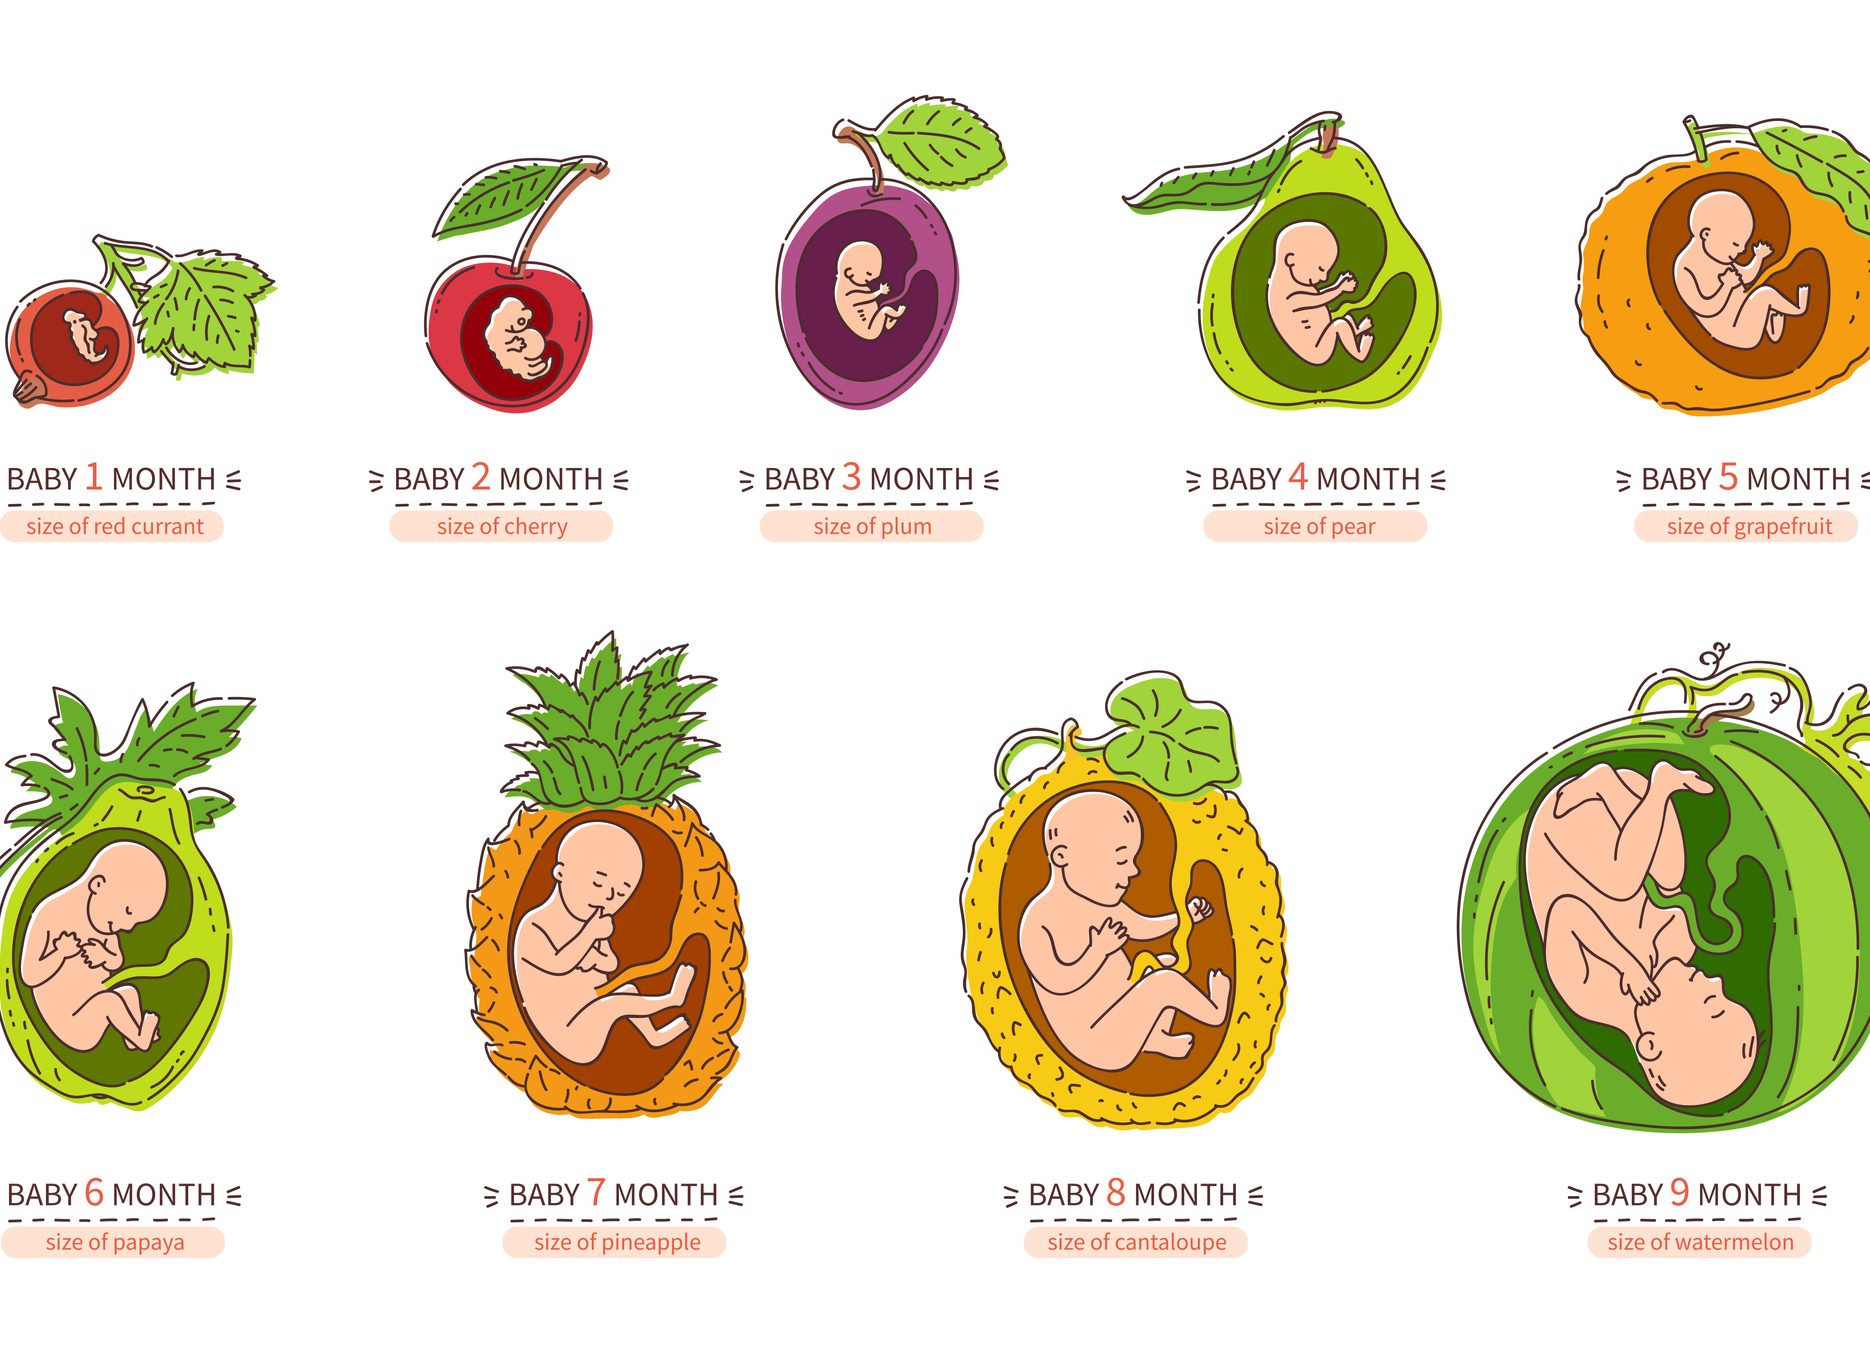 FUNIBER-embryo-month-stage-growth-pregnancy-fetal-development-vector-flat-infographic-icons